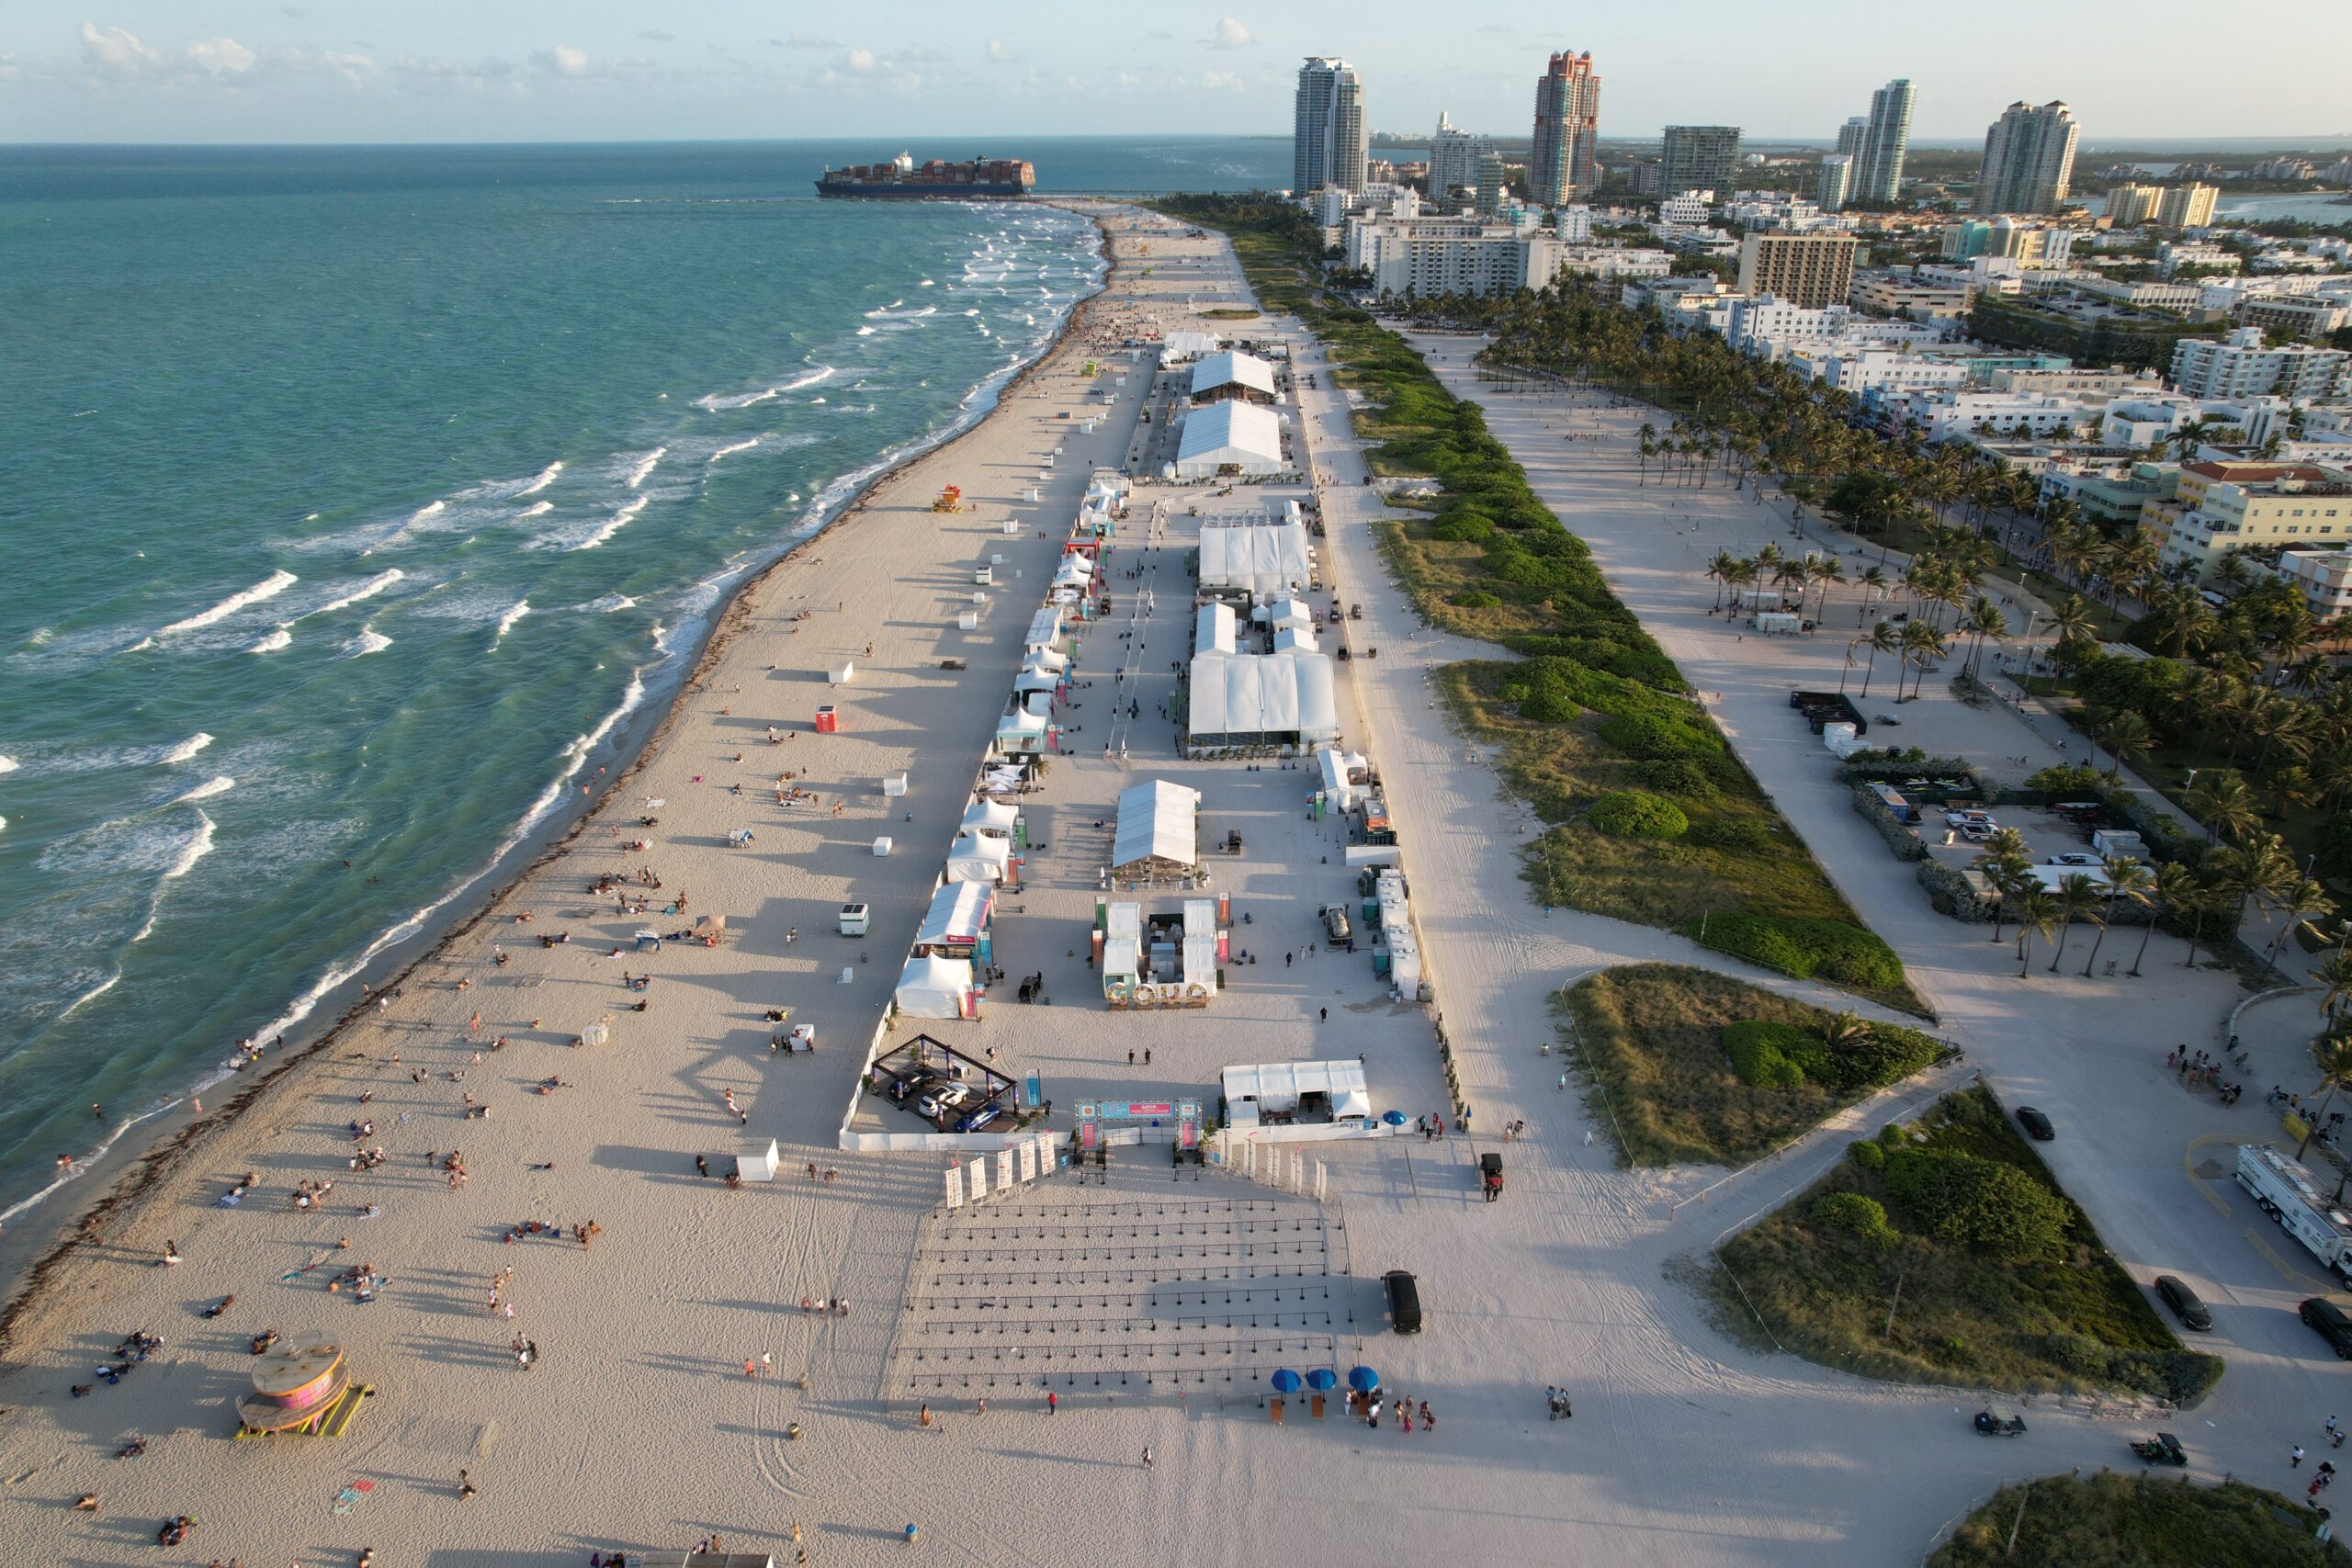 2023 South Beach Wine and Food Festival venue tents